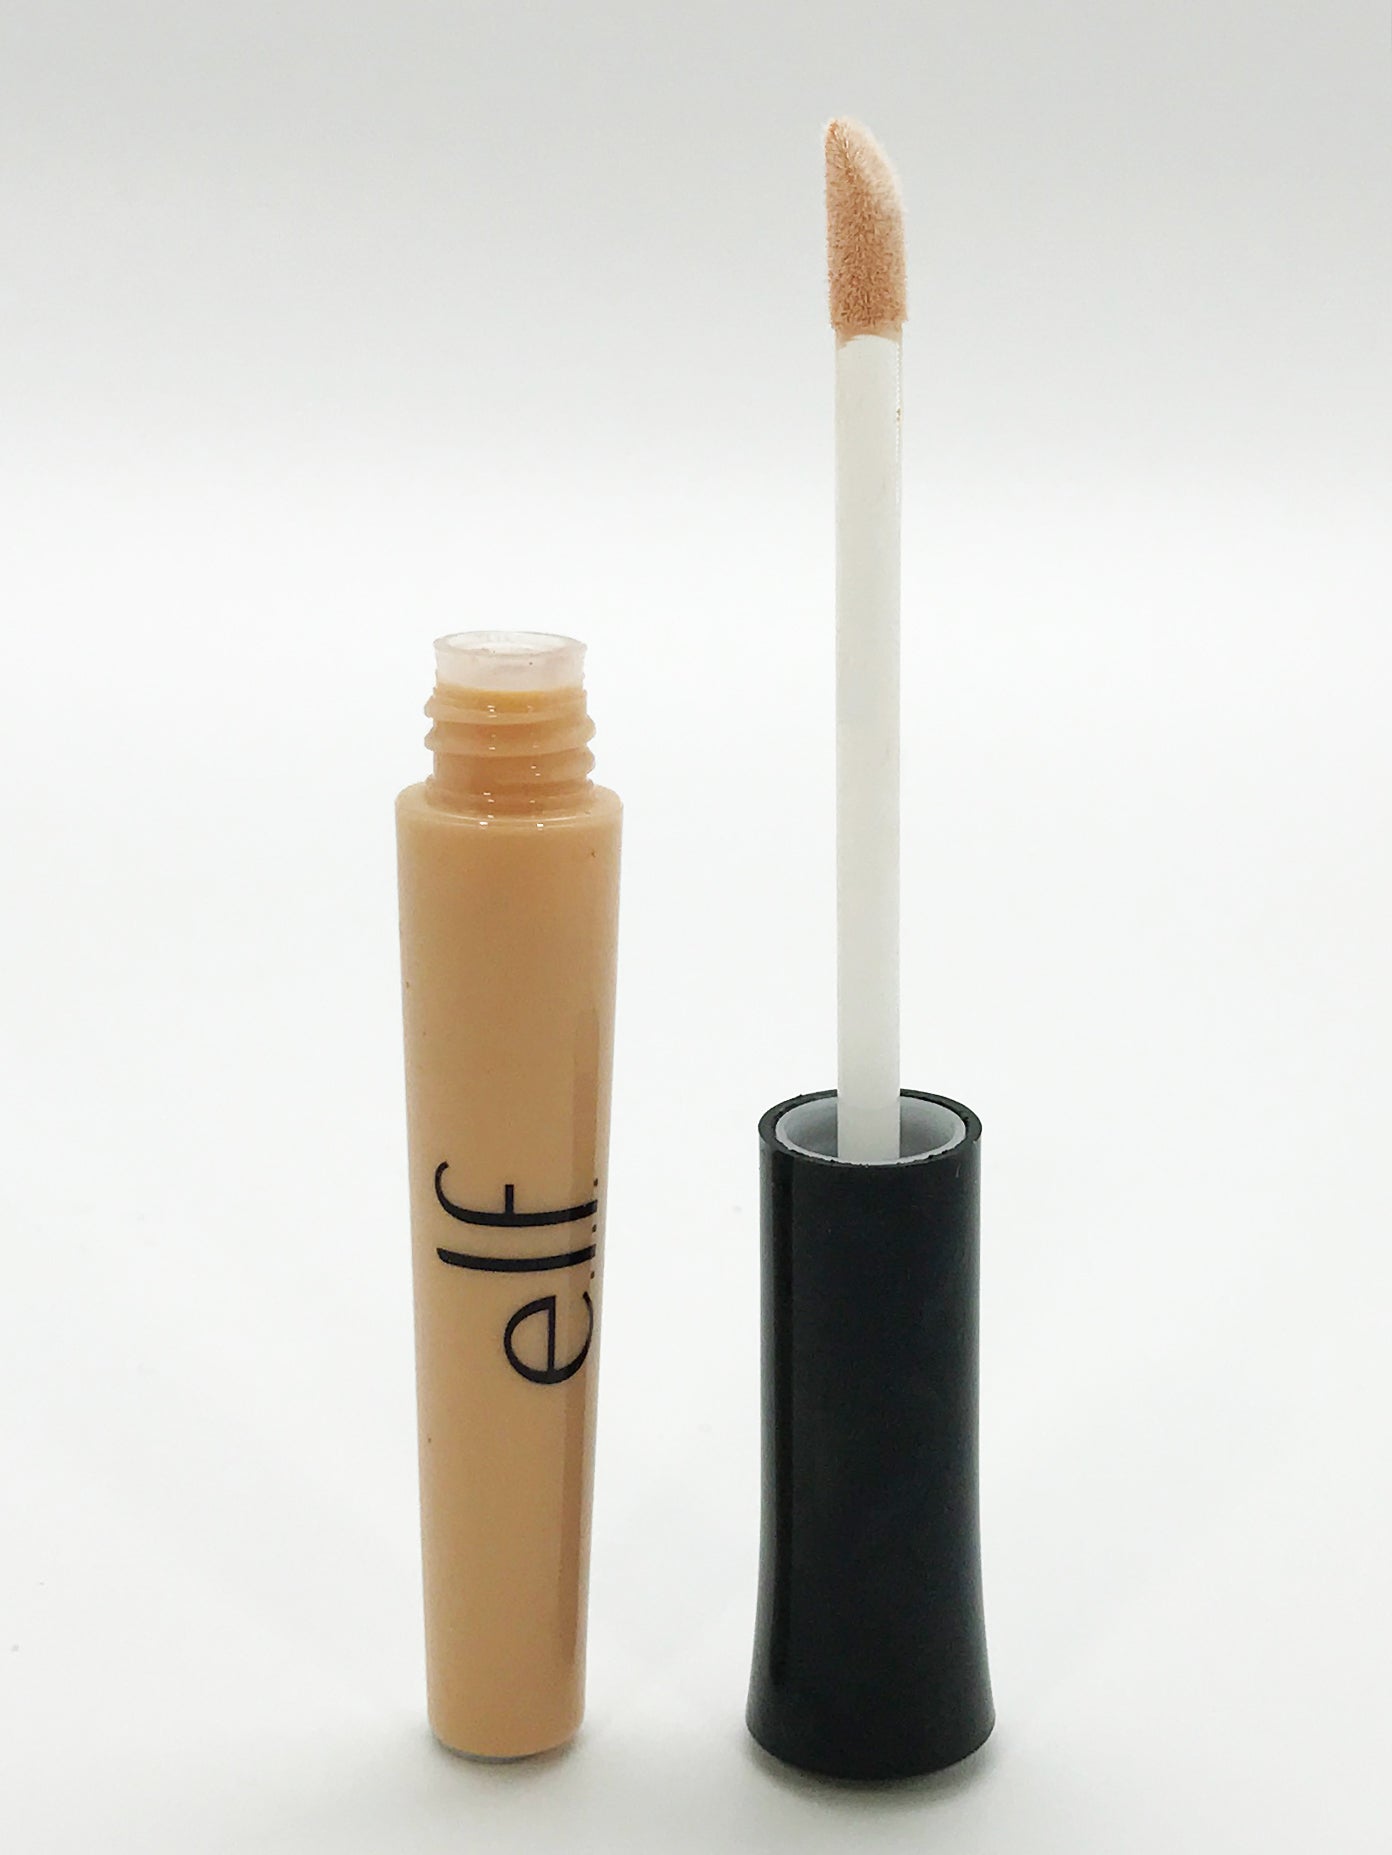 Create Your Own Beauty Box -  E.L.F Cosmetics Eyelid Primer - Sheer